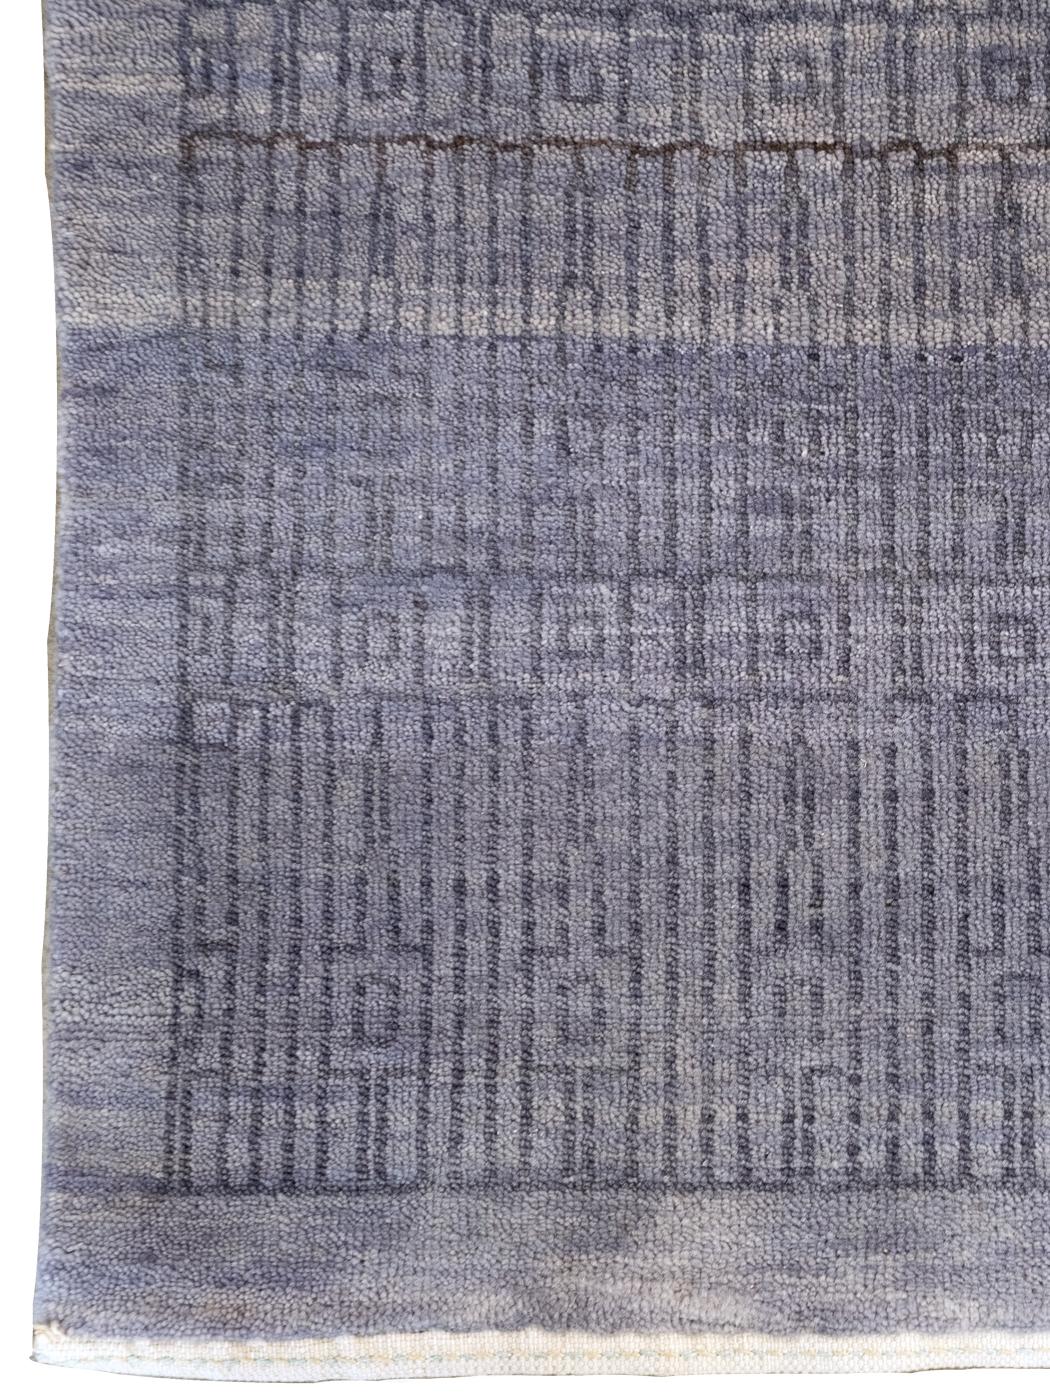 Contemporary Orley Shabahang, Gray Modern Architectural Carpet, Wool, Hand-Knotted, 9' x 12' For Sale